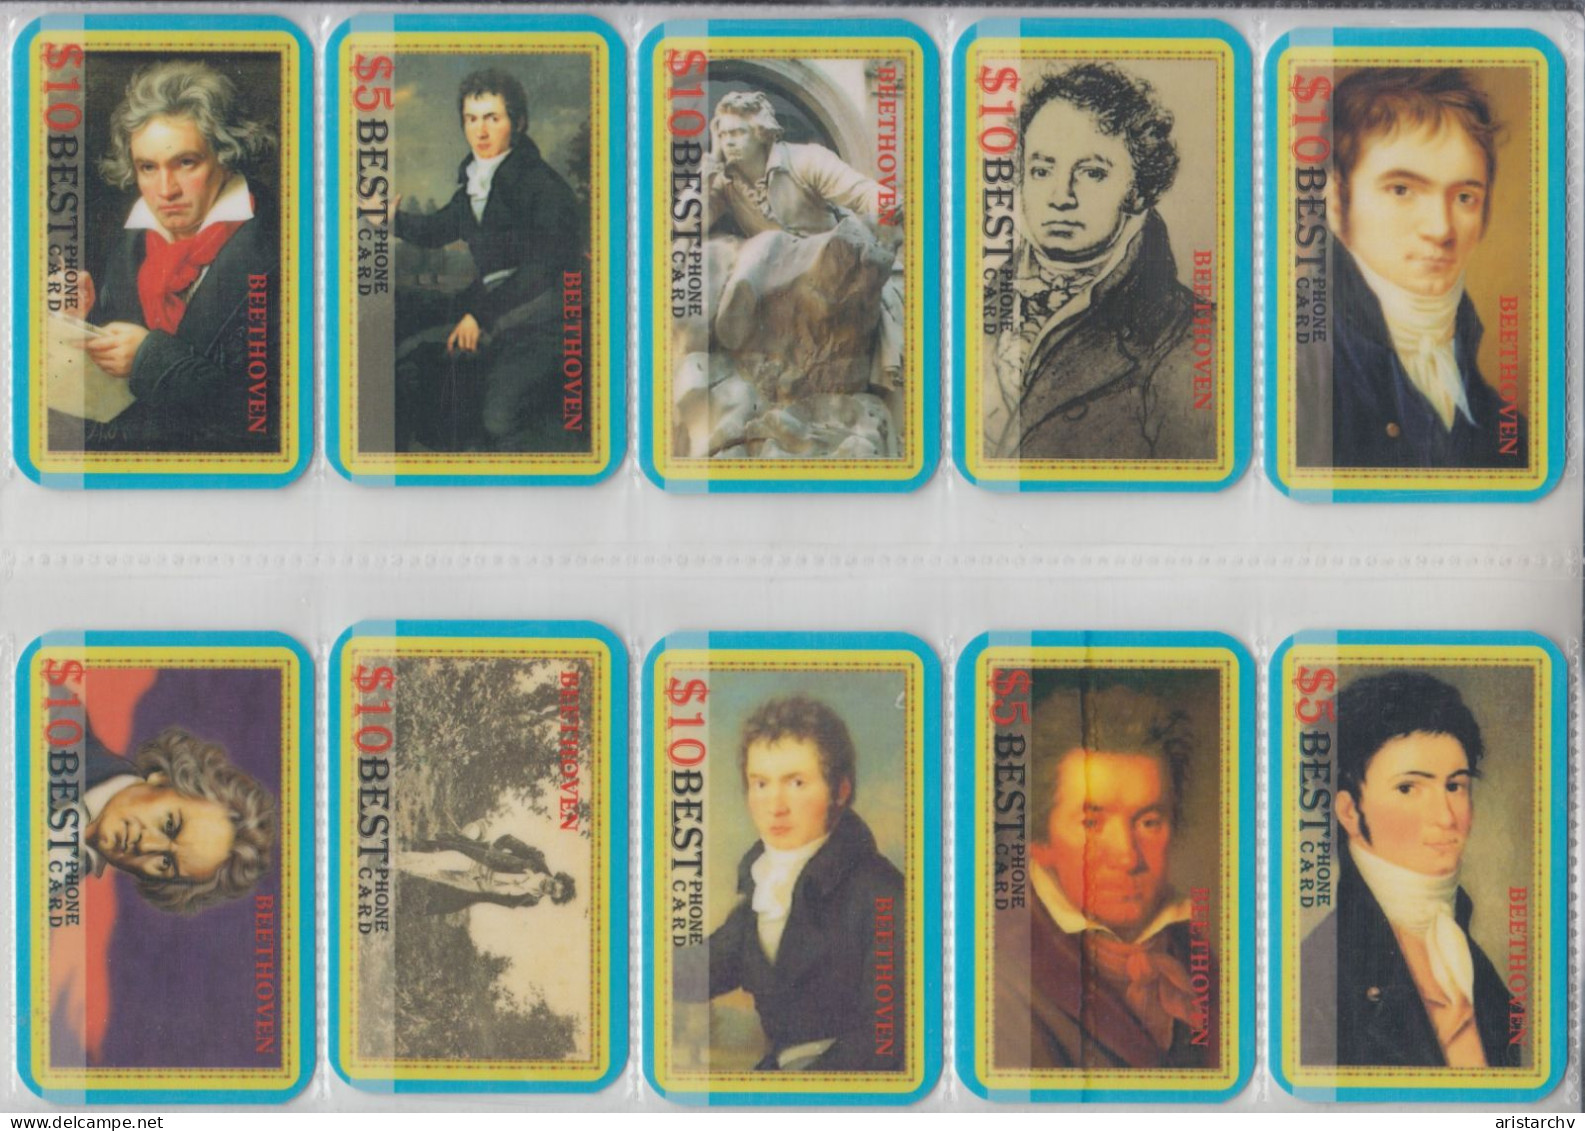 USA CLASSIC MUSIC COMPOSER LUDWIG VAN BEETHOVEN SET OF 10 CARDS - Musique